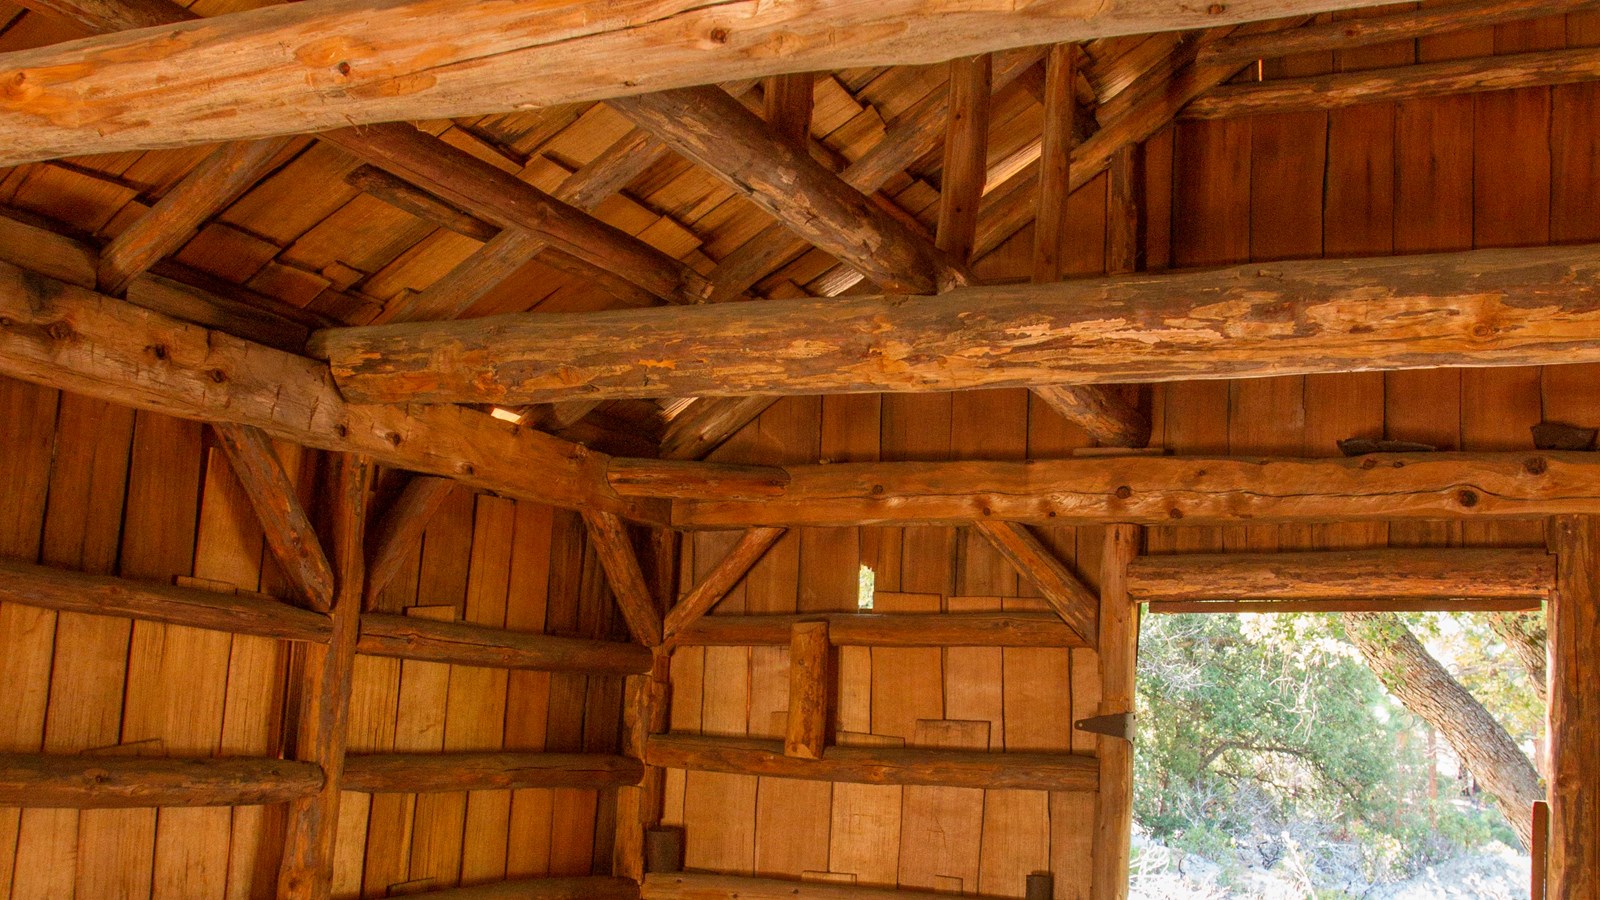 The inside of Knapp\'s Cabin with exposed wood beams and wood walls